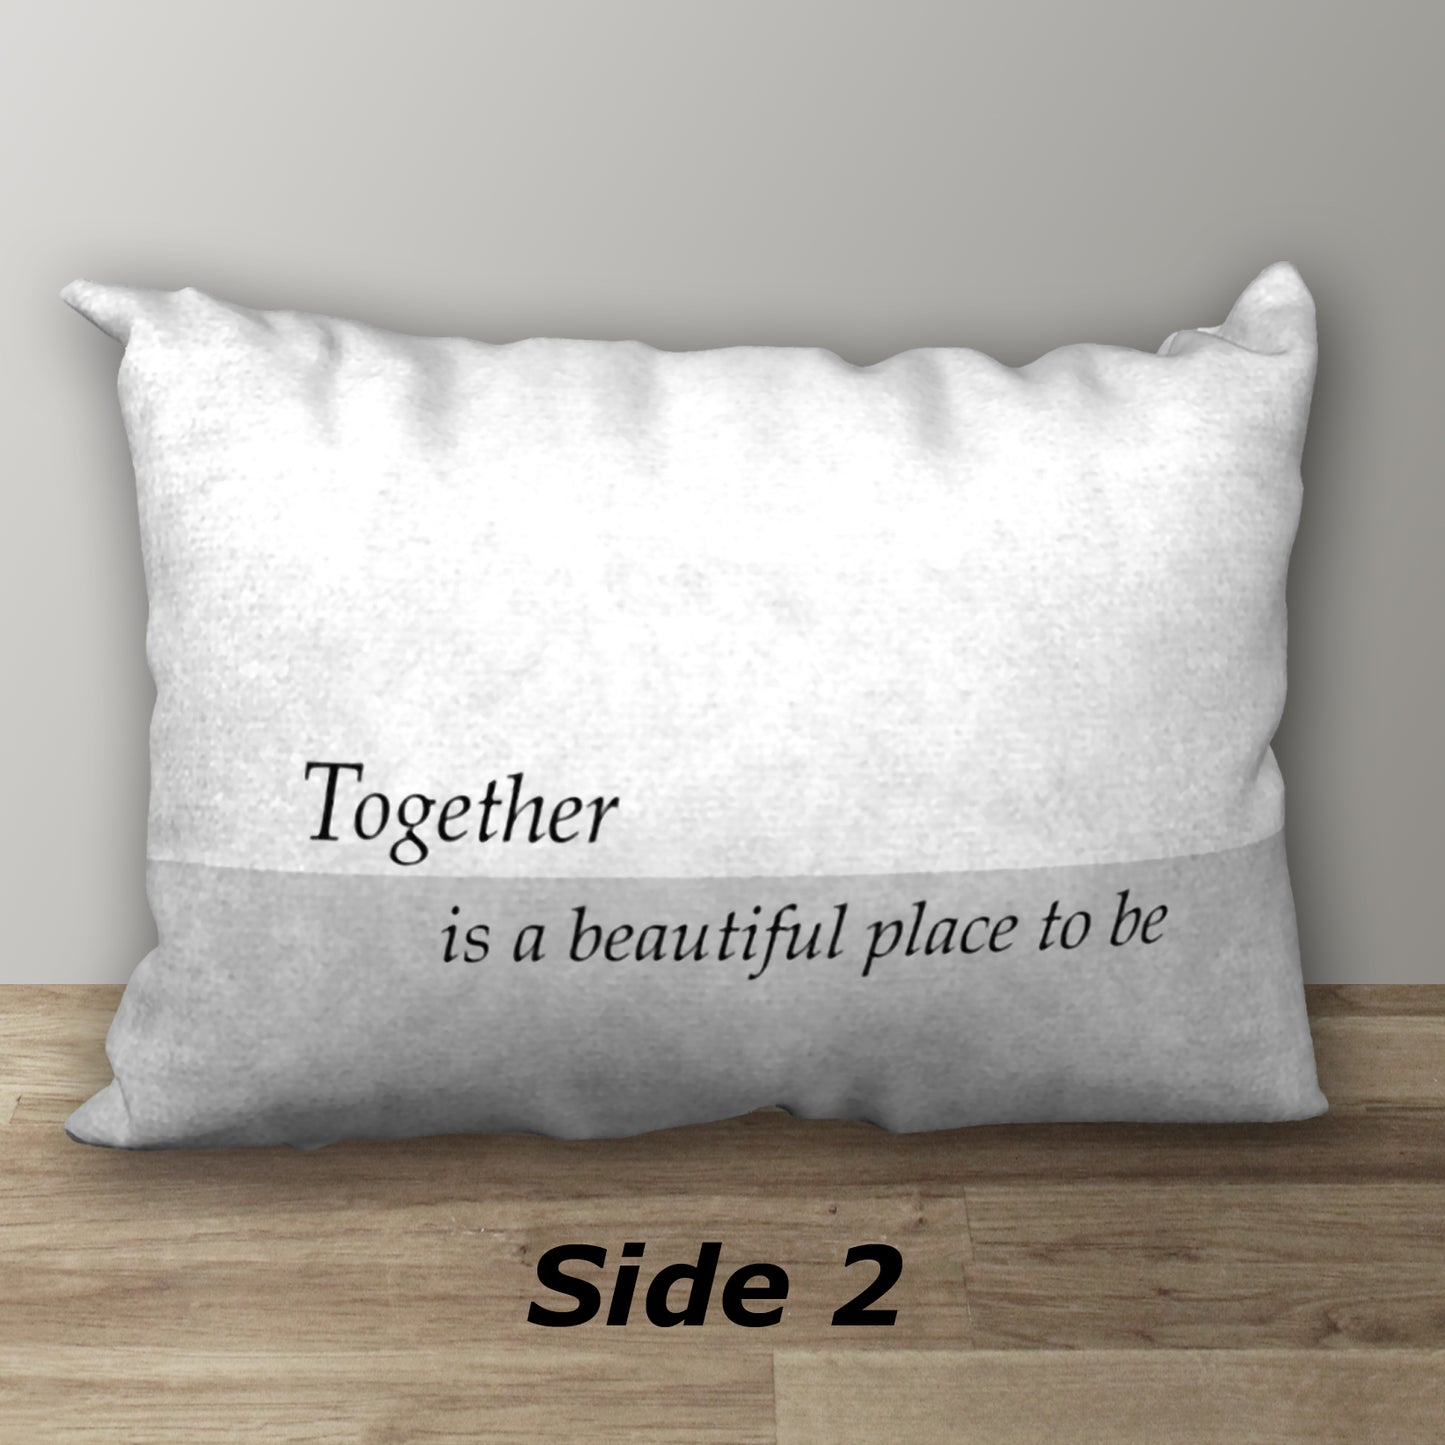 Personalized Classic Design Wedding Pillow, 20"x14"